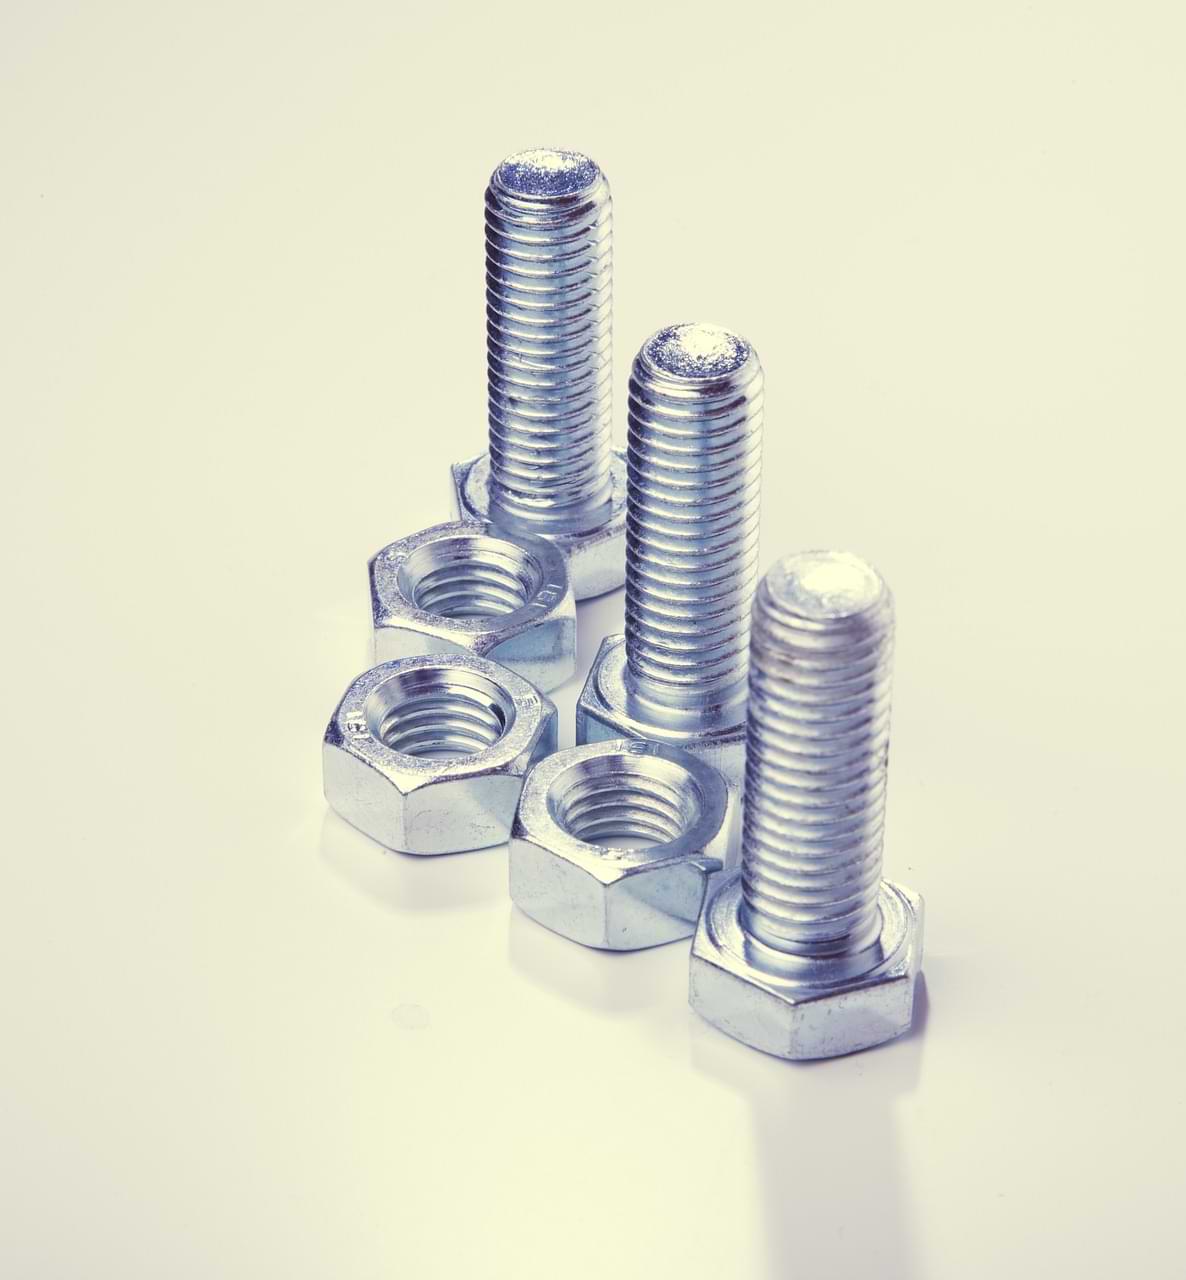 Zinc plated fasteners